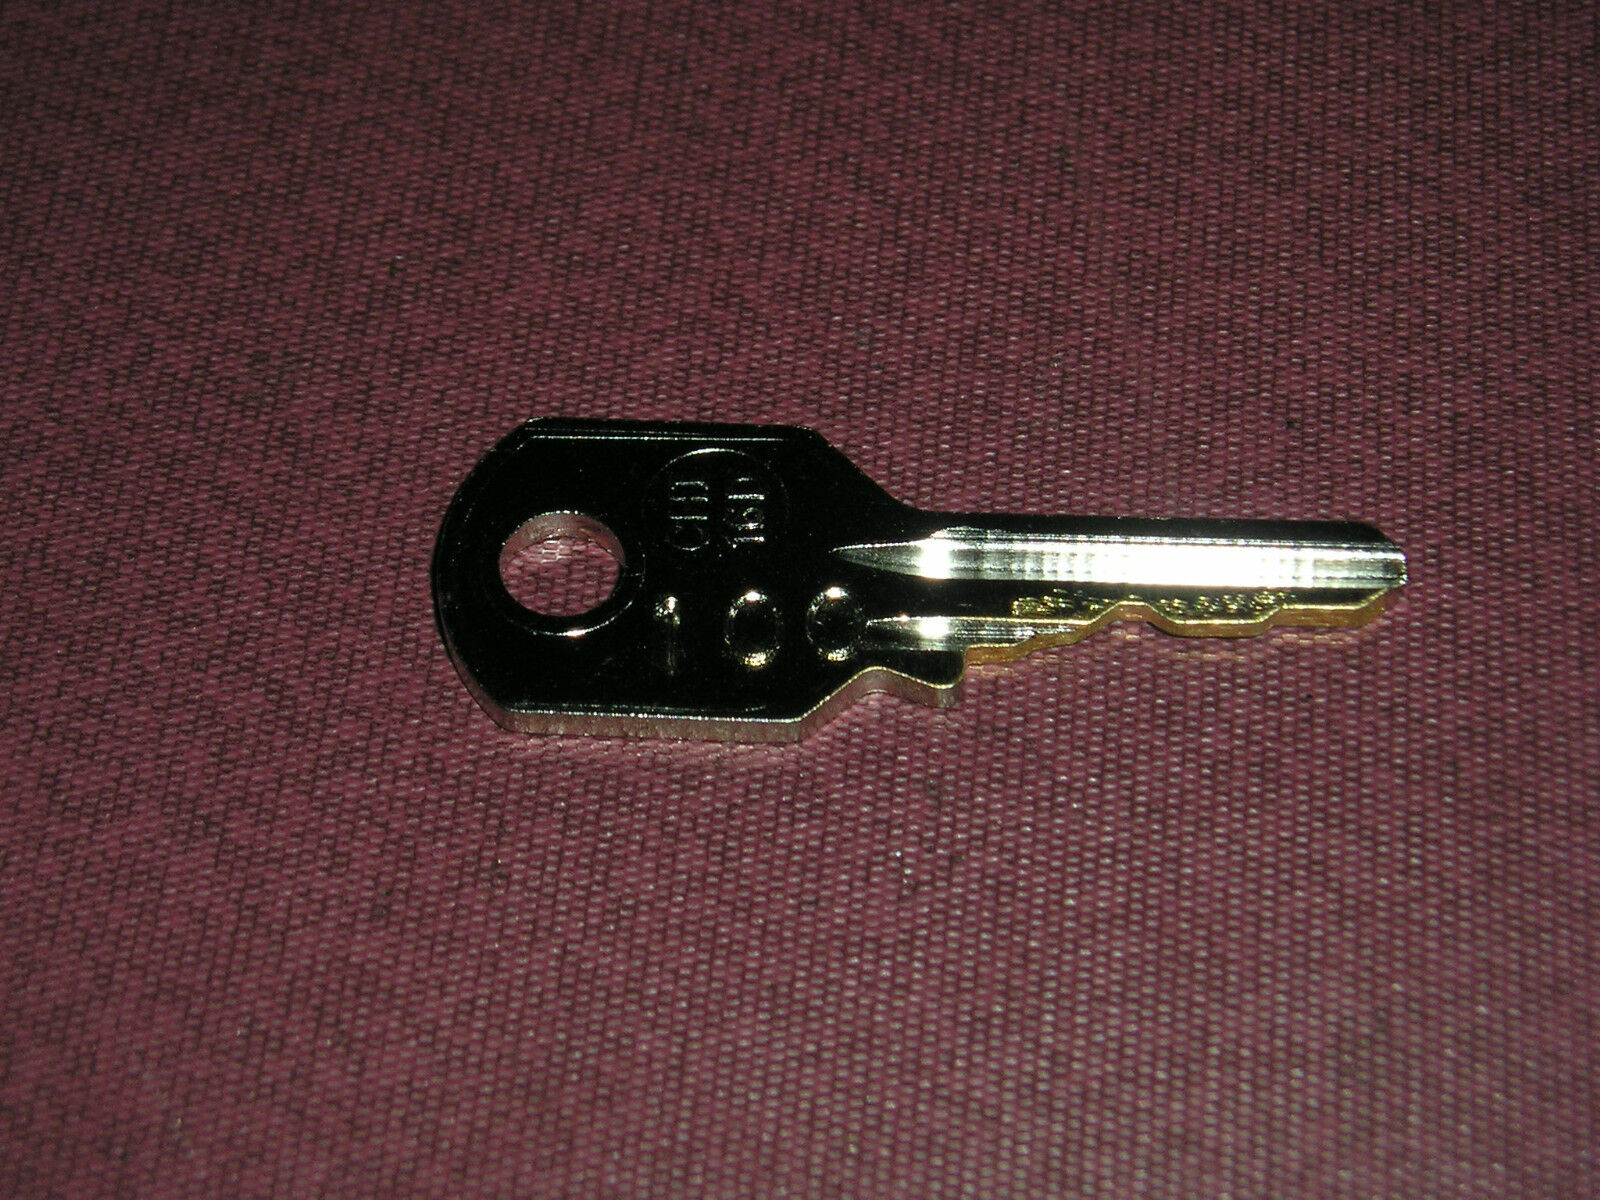 CHICAGO / STEELCASE S100 REPLACEMENT KEYS -  OFFICE FURNITURE, FILE CABINET LOCK